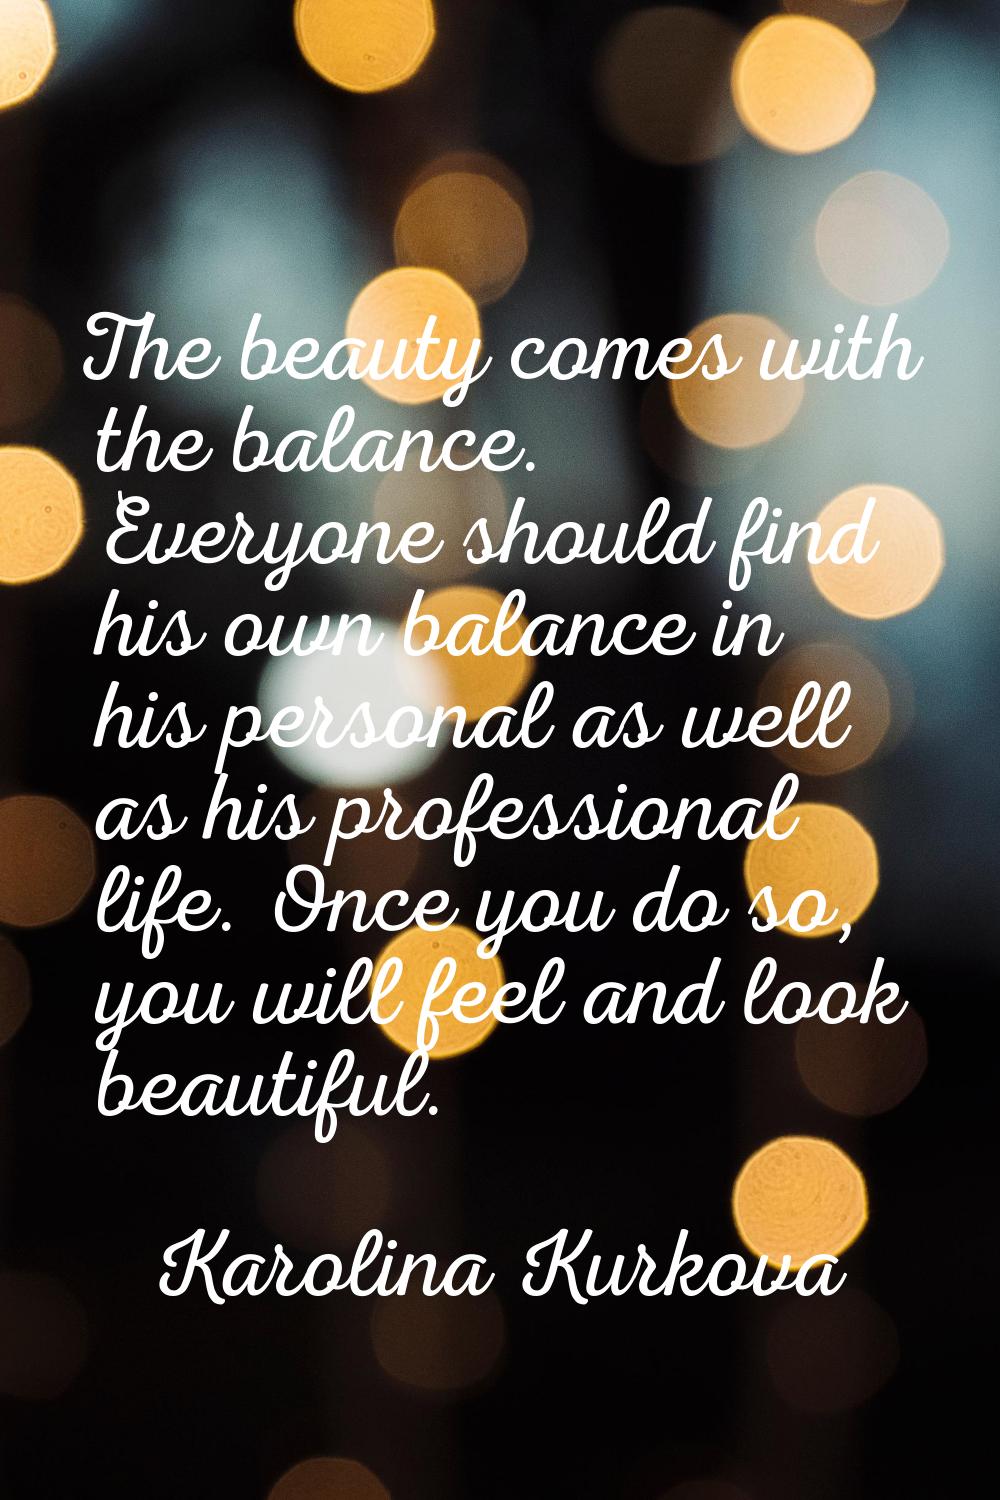 The beauty comes with the balance. Everyone should find his own balance in his personal as well as 